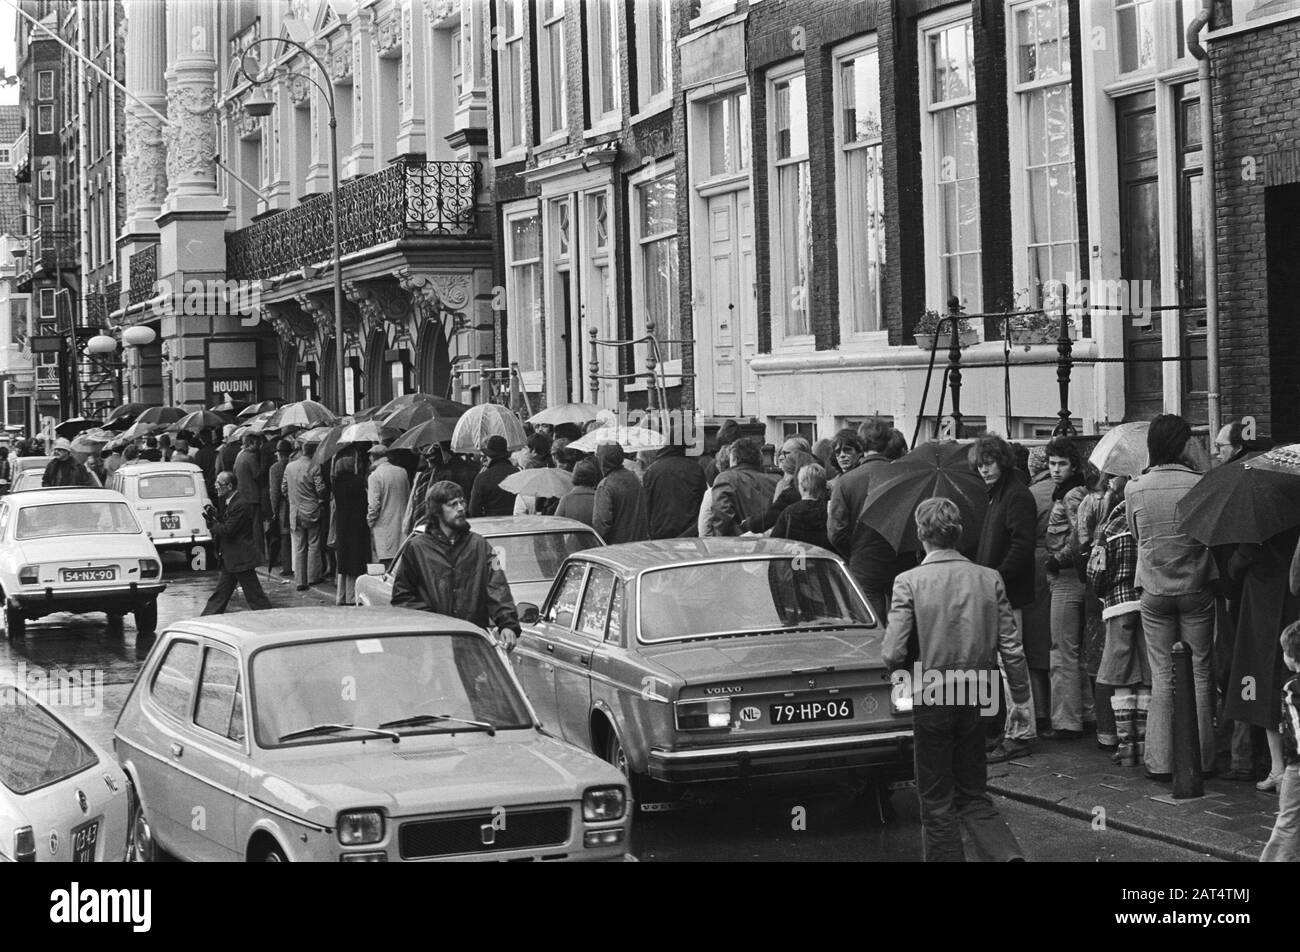 Ticket sales Carre for musical Foxtrot t.g.v. 90th anniversary Carre; entrance prices as in 1887 Date: 2 October 1977 Location: Amsterdam, Noord-Holland Keywords: musicals, theaters Institution name: Carré Stock Photo